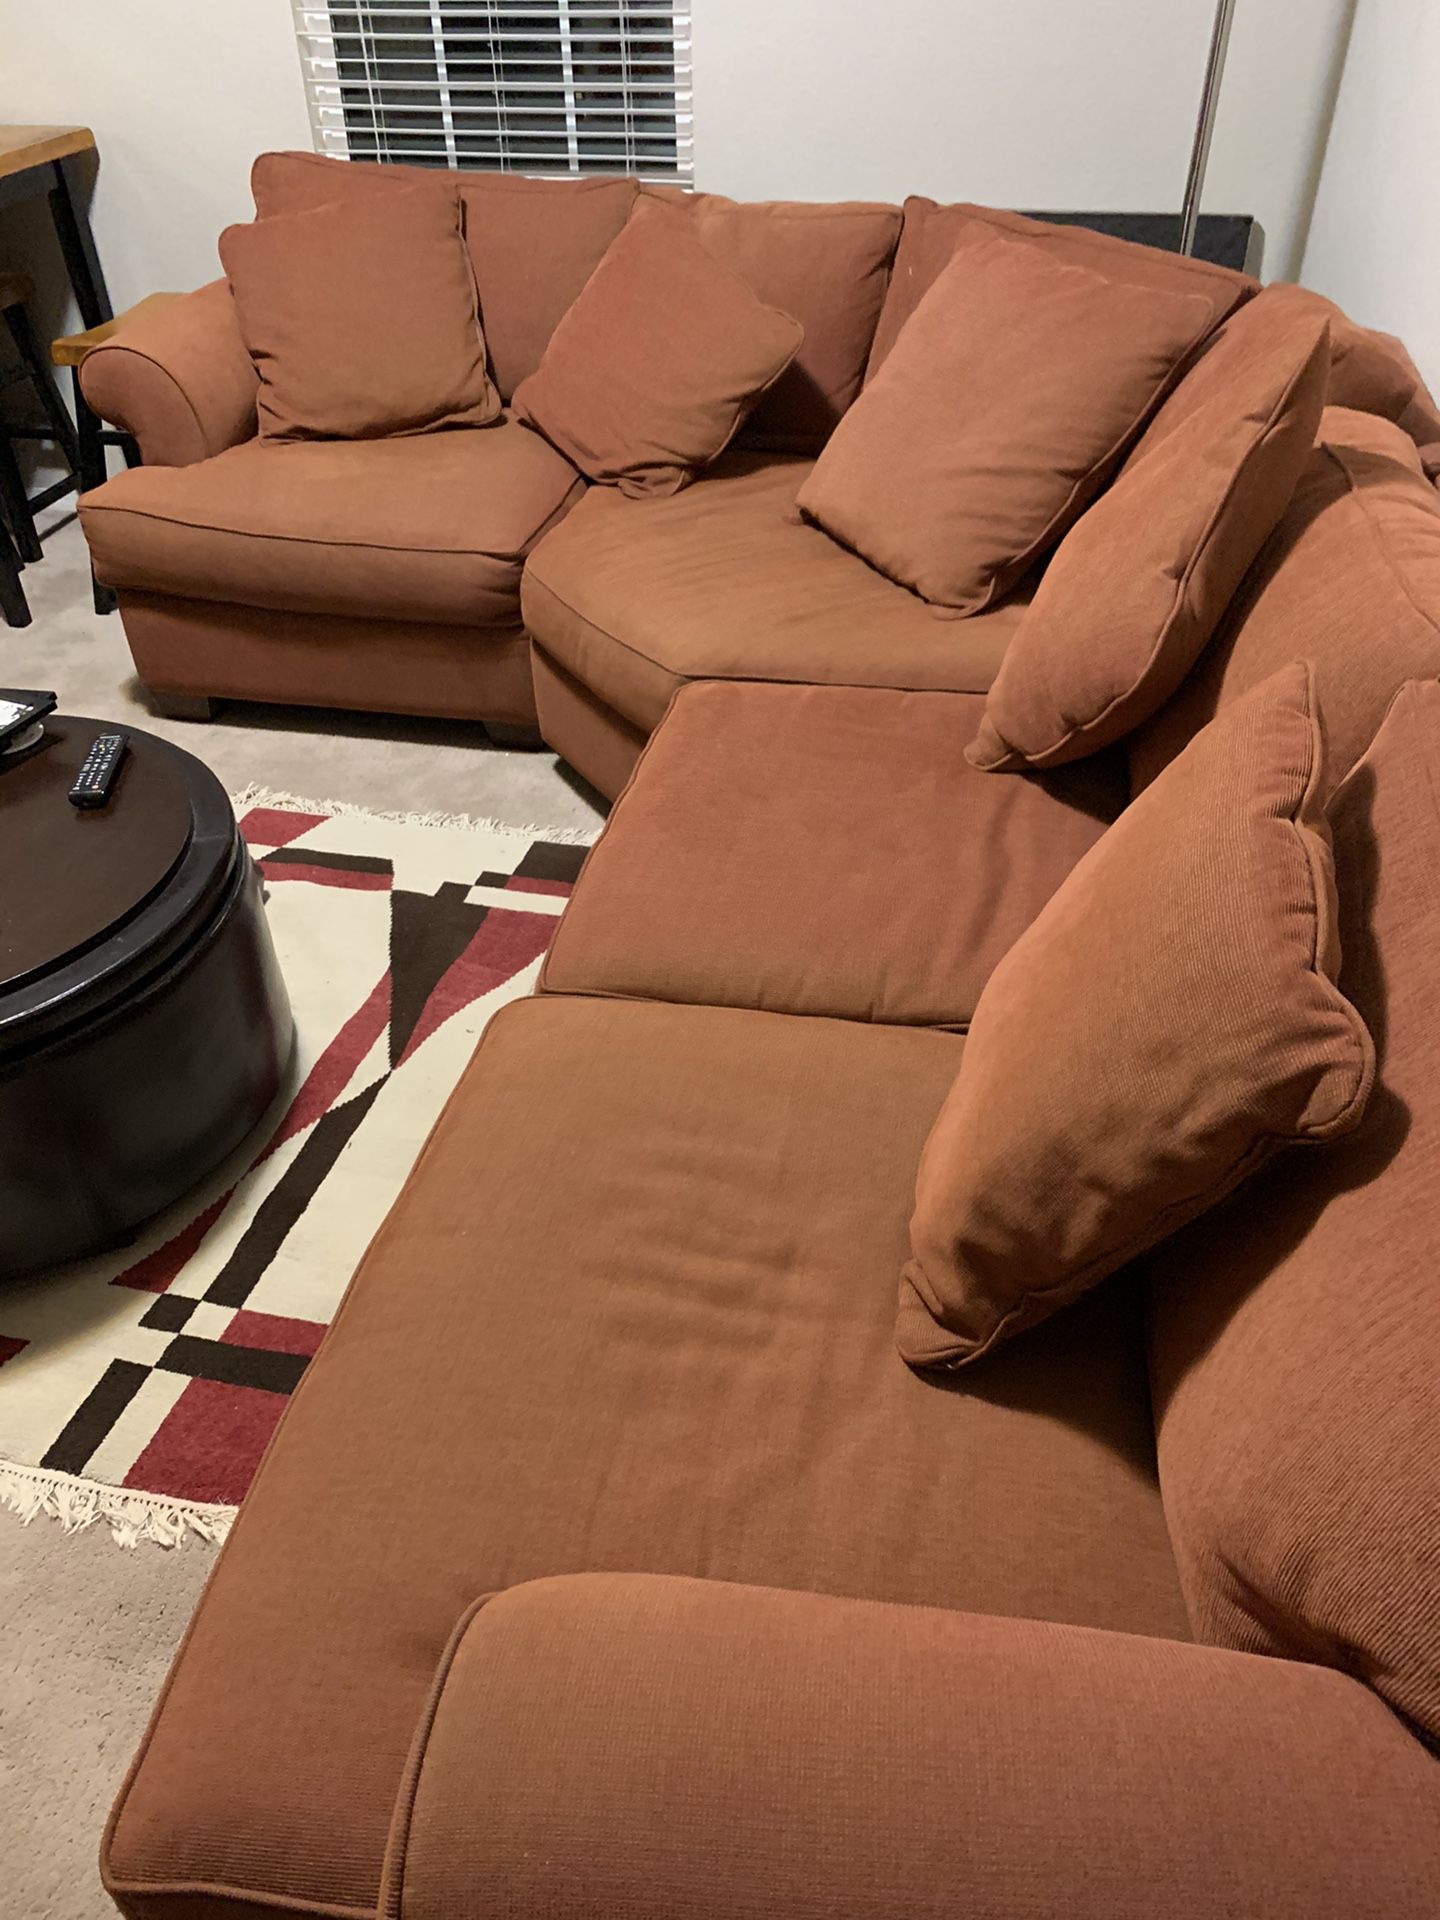 Sofa sectional in great condition !